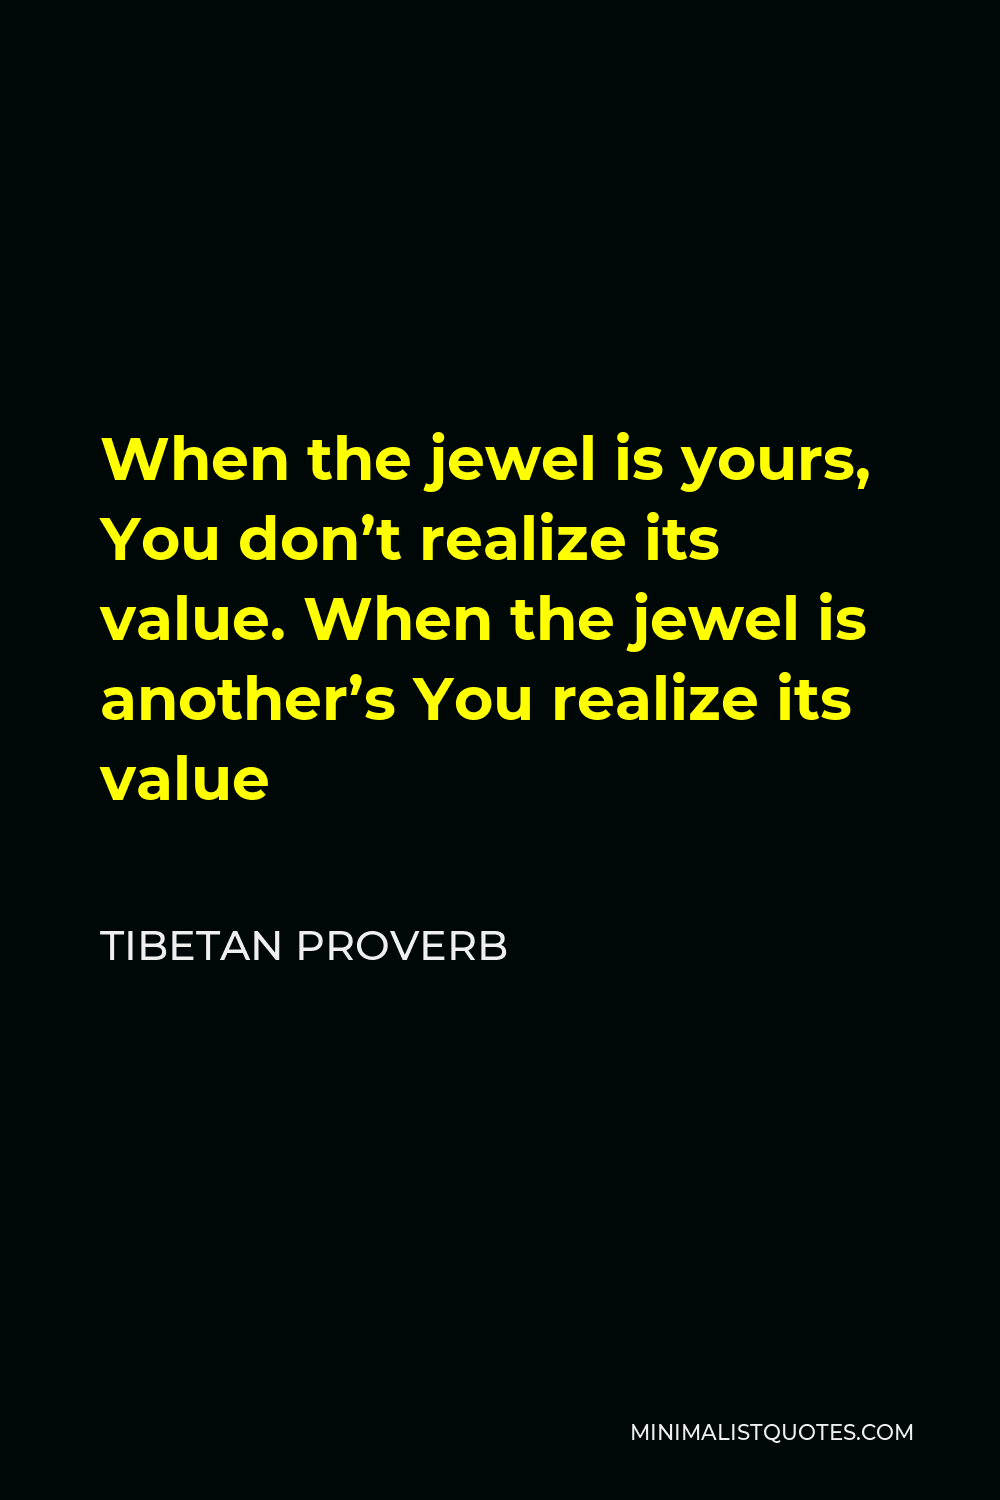 Tibetan Proverb Quote - When the jewel is yours, You don’t realize its value. When the jewel is another’s You realize its value